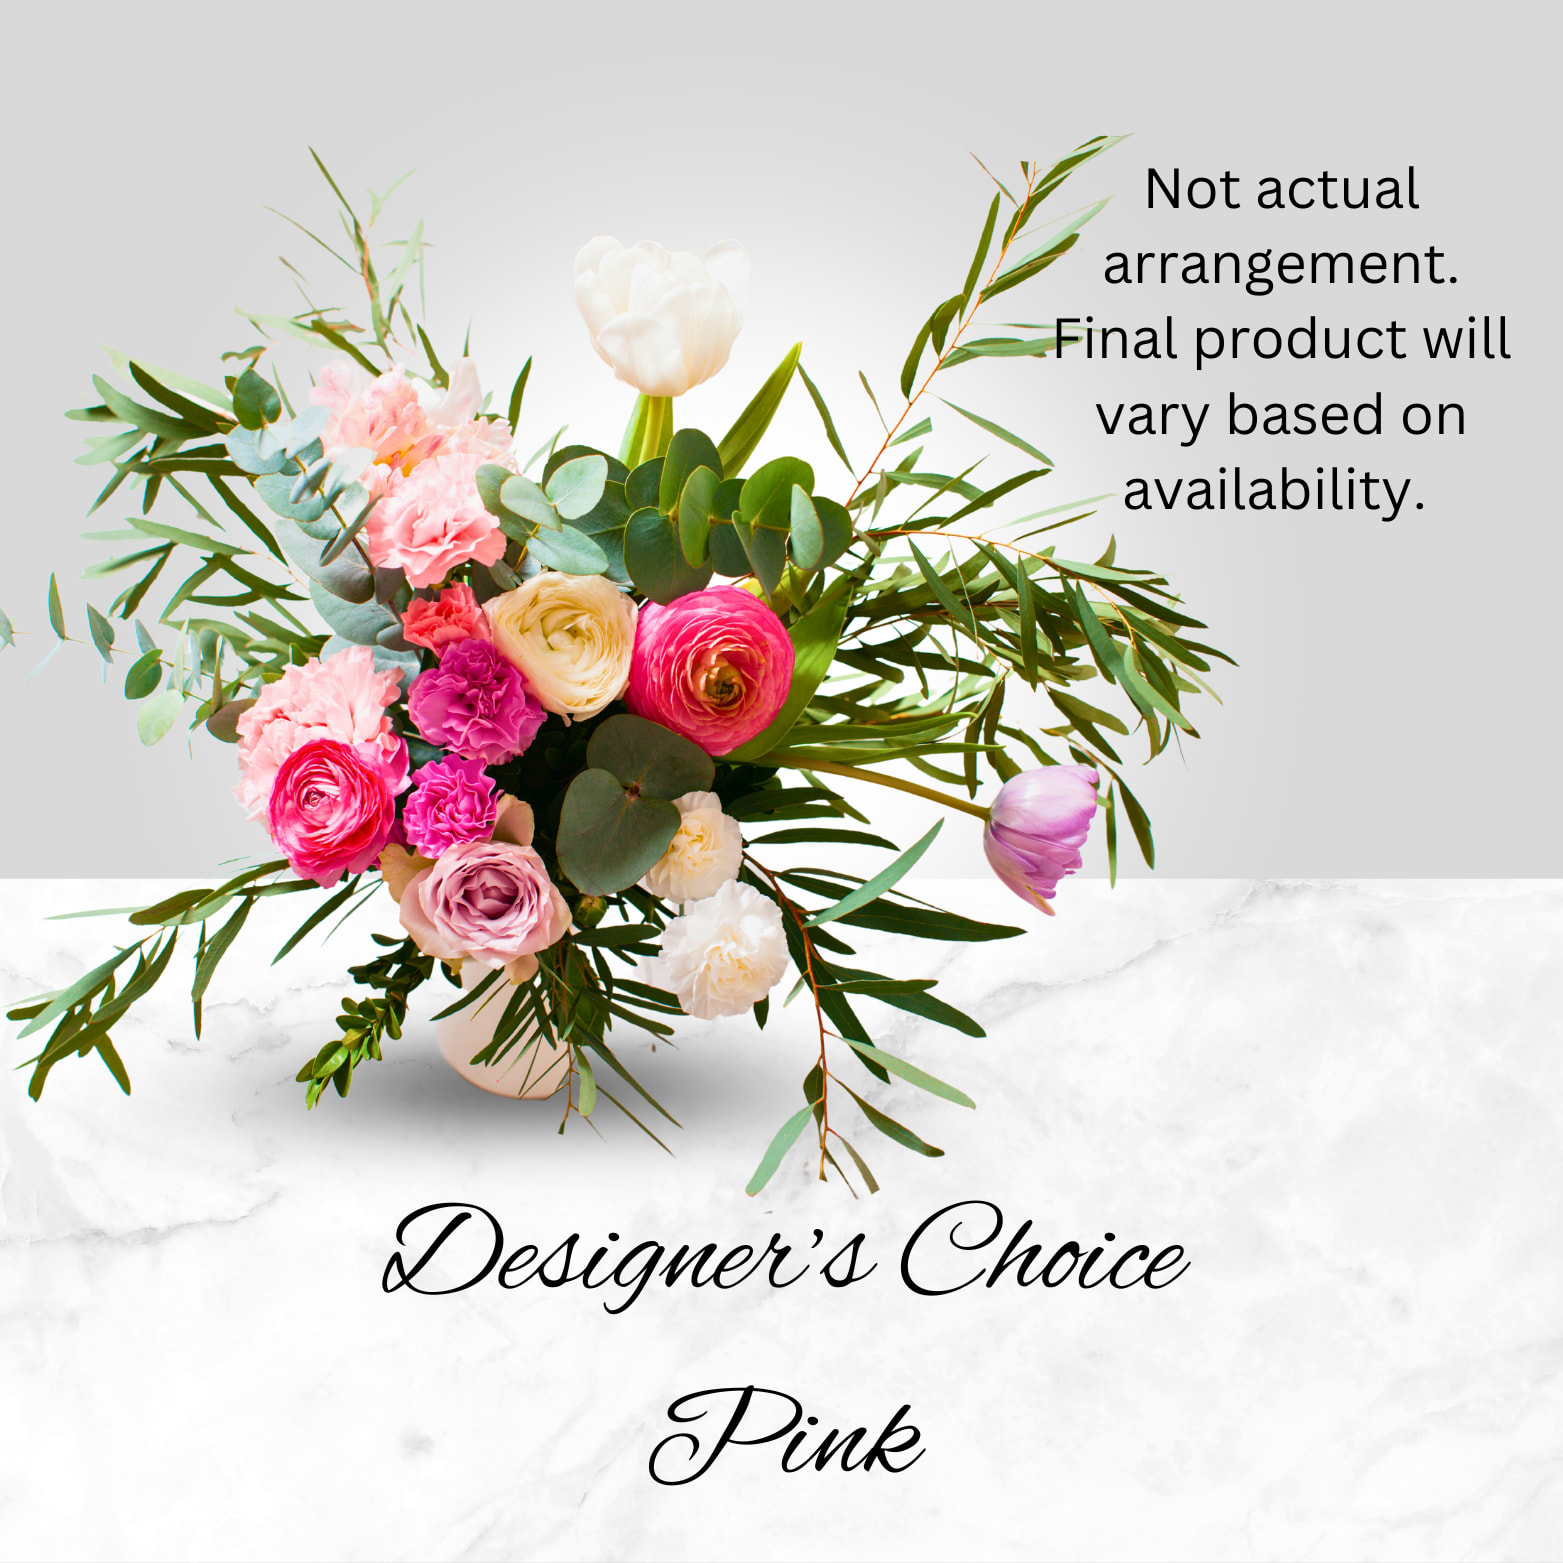 Pink Designer's Choice - This arrangement will feature pinks as the dominant color with other beautiful colors to compliment it. This bright color of femininity is sure to delight! Final product will be different than photo depending on availability, but will be beautiful.